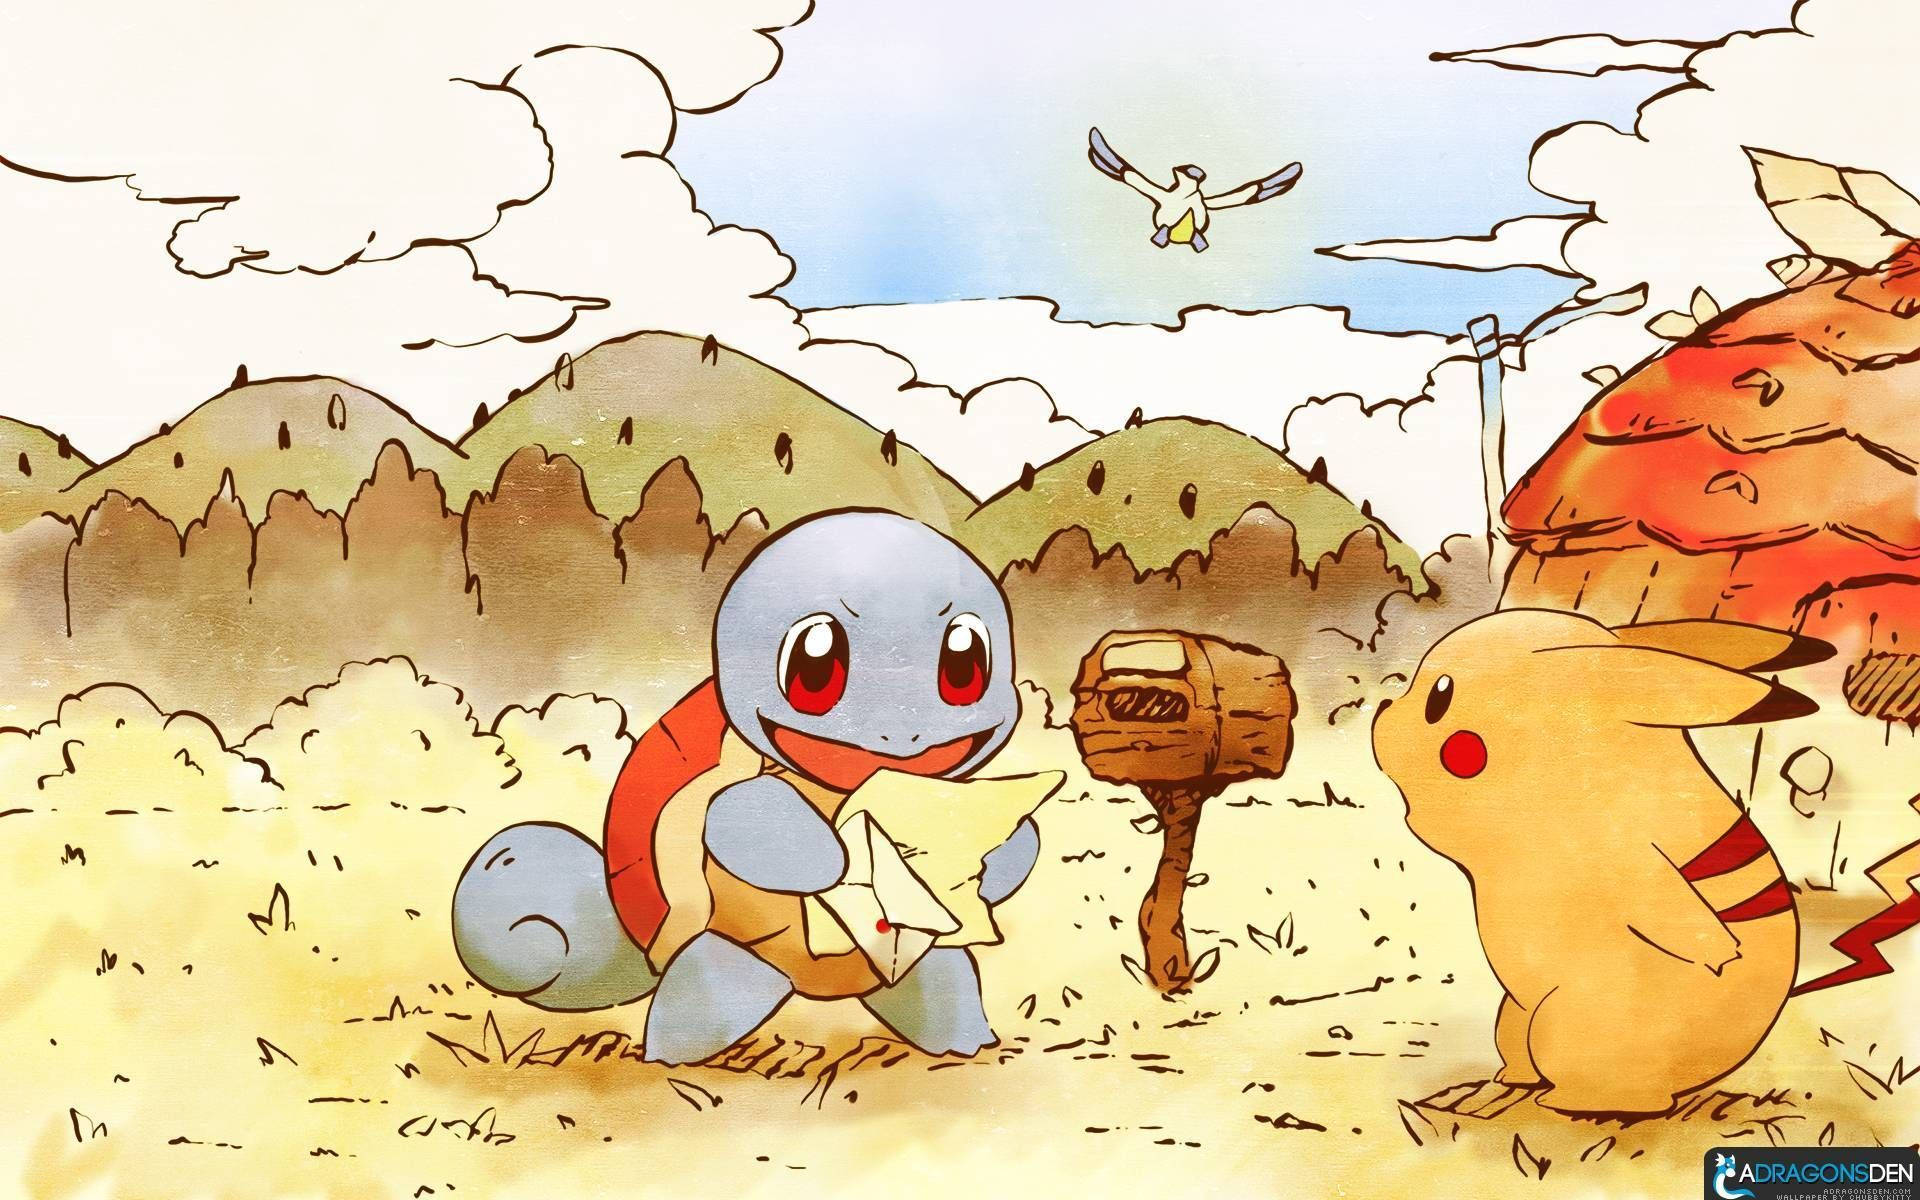 Cute Pokemon Squirtle Letter